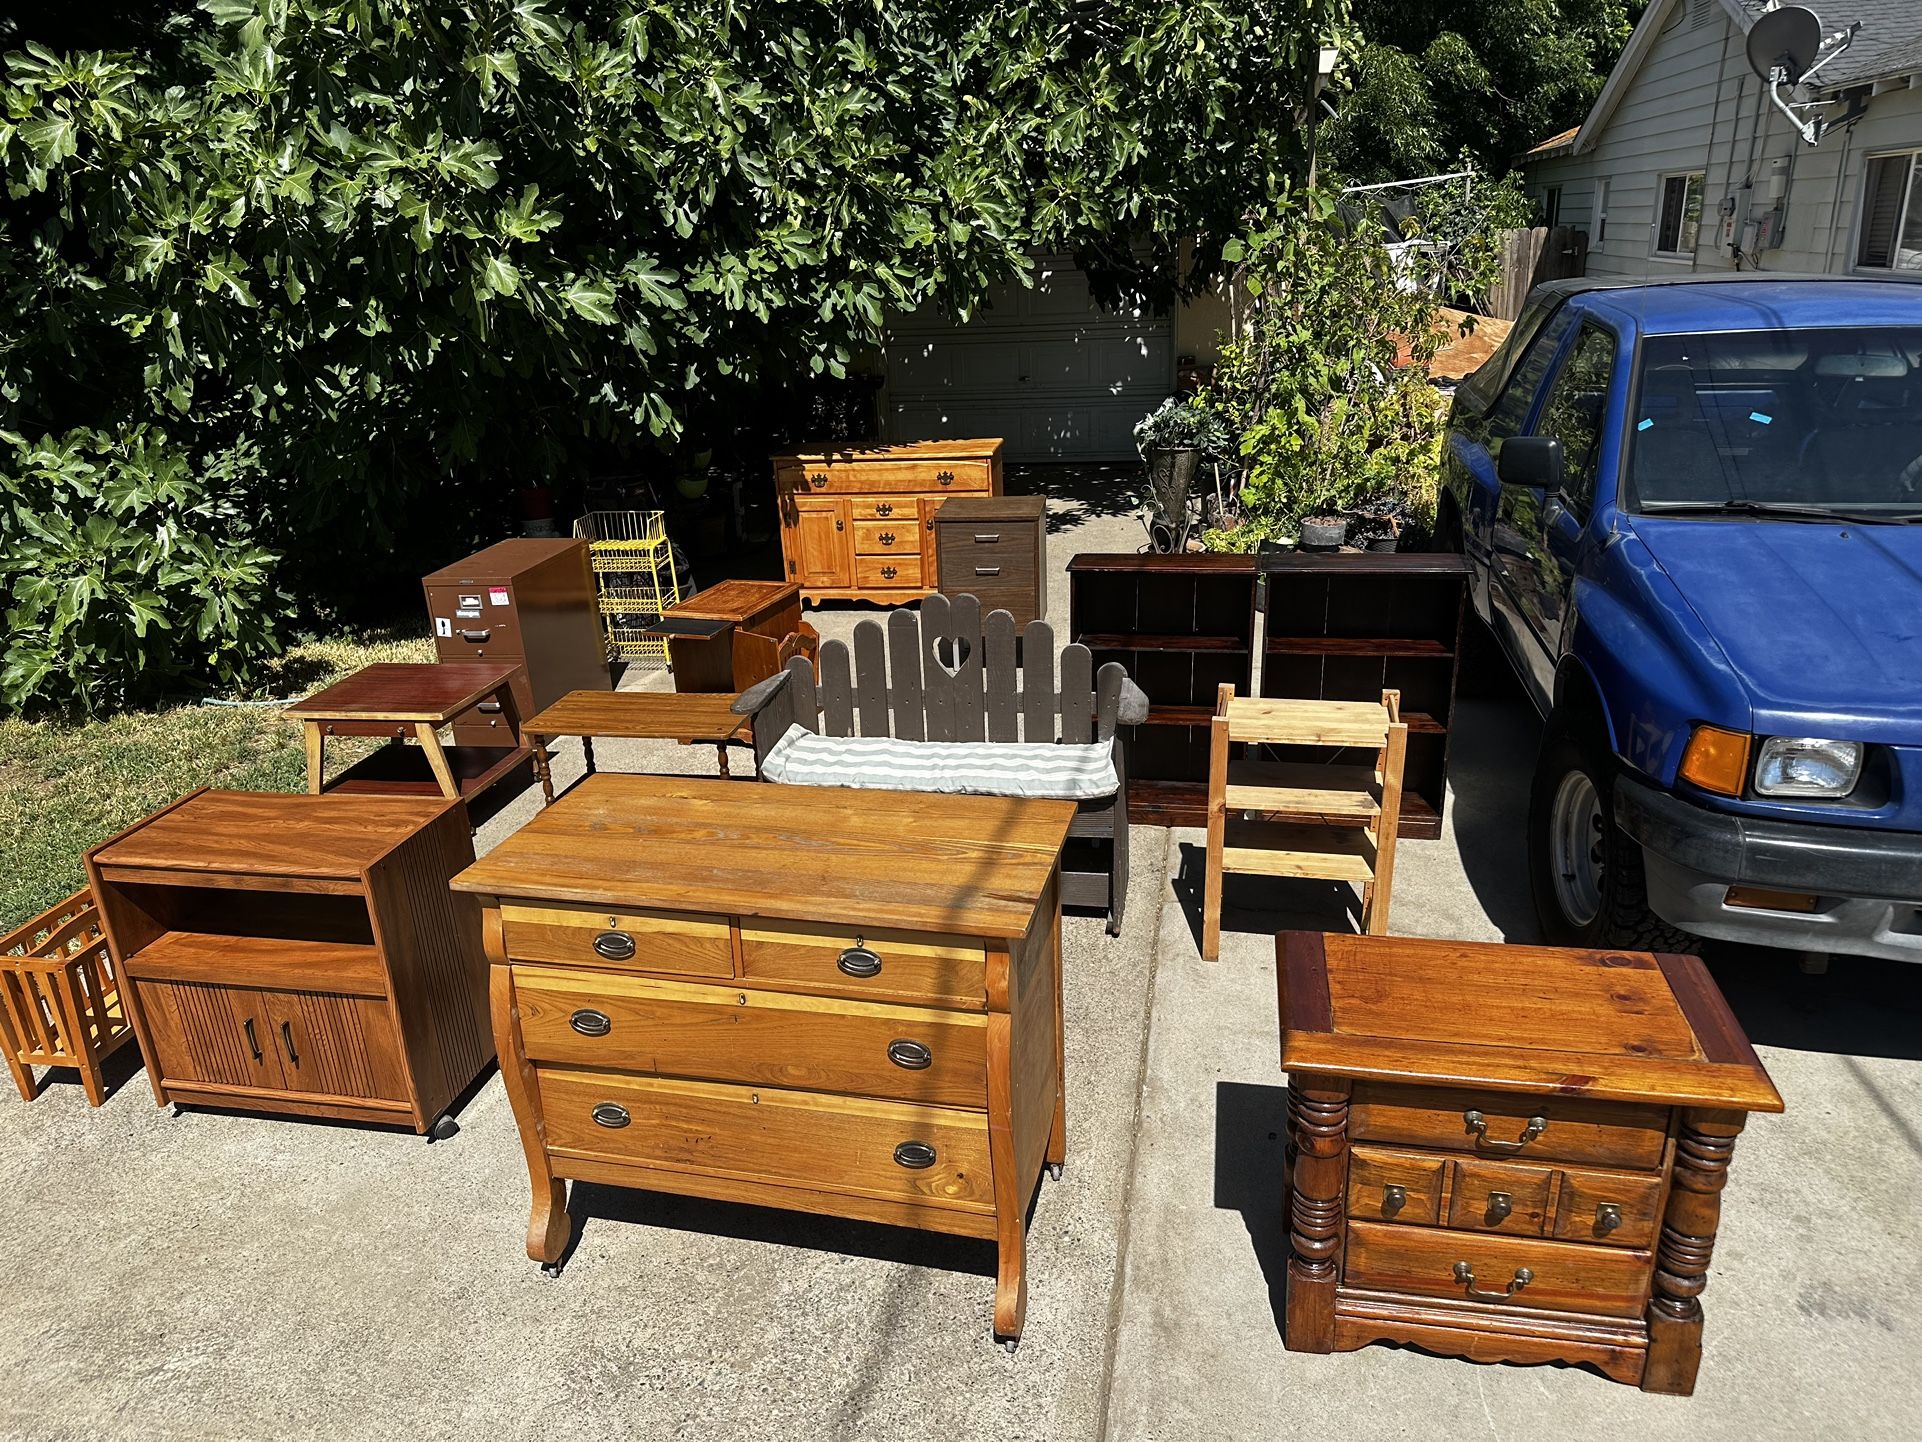 Furniture: Dresser(s)/Hutch, End Tables, Night Stands, Microwave Caddy or TV Stand (some on wheels), Bookshelves, Charming Outdoor Bench